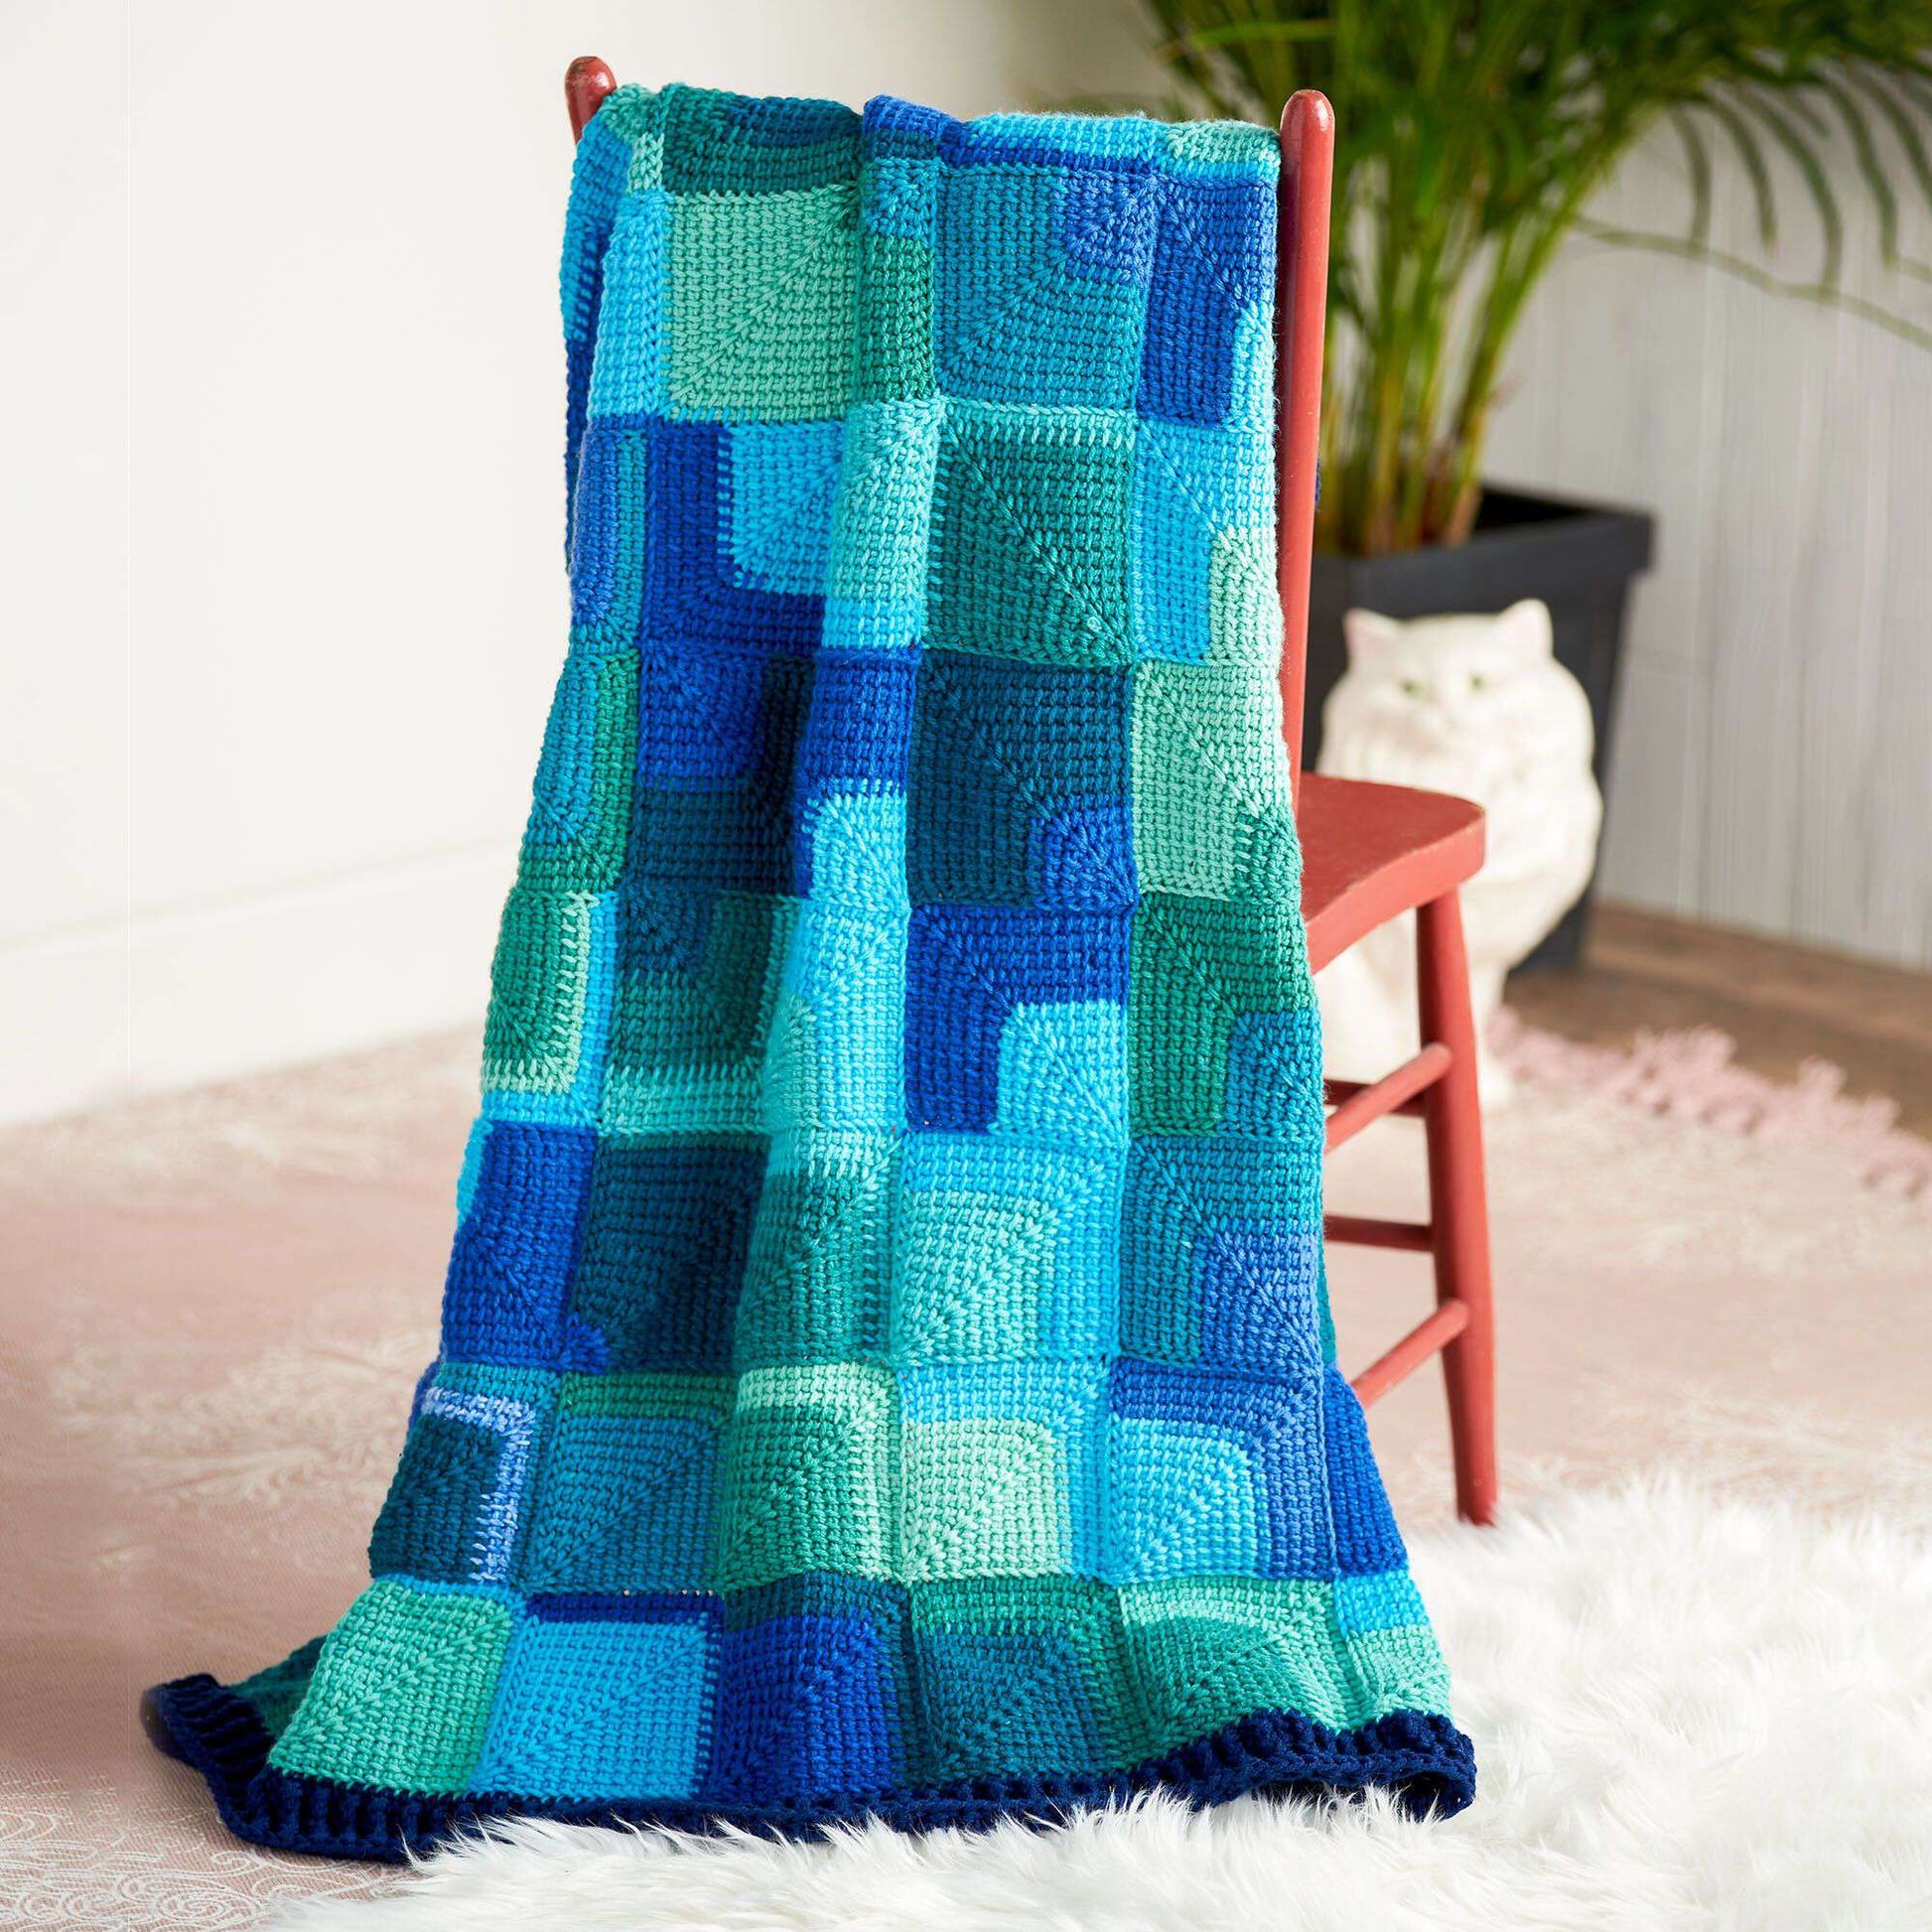 Red Heart Modern Squares Throw | Yarnspirations